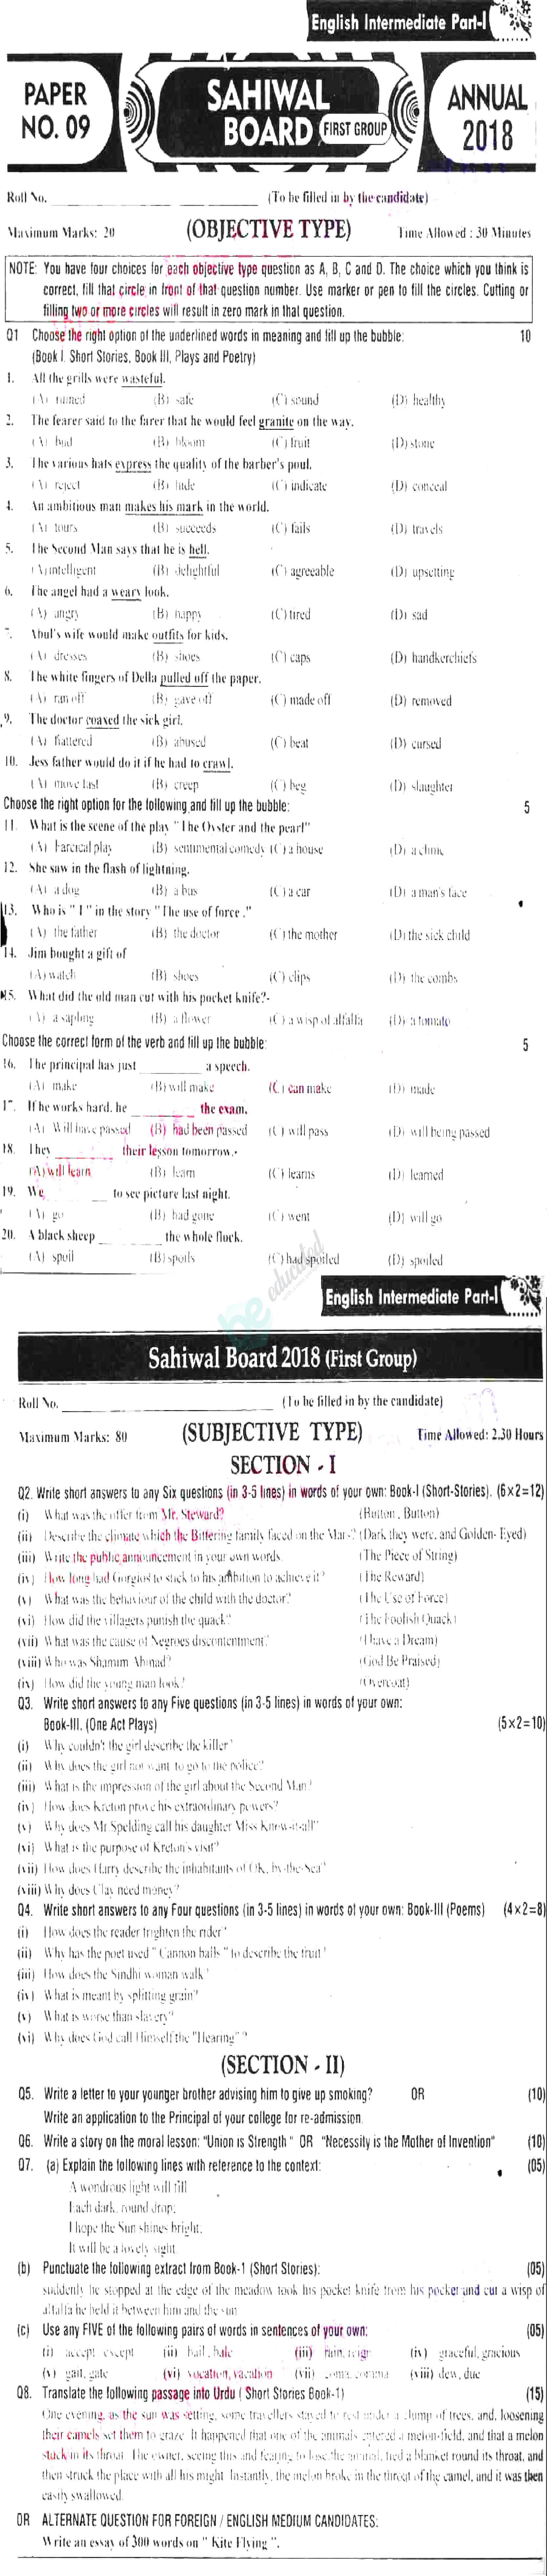 English 11th class Past Paper Group 1 BISE Sahiwal 2018